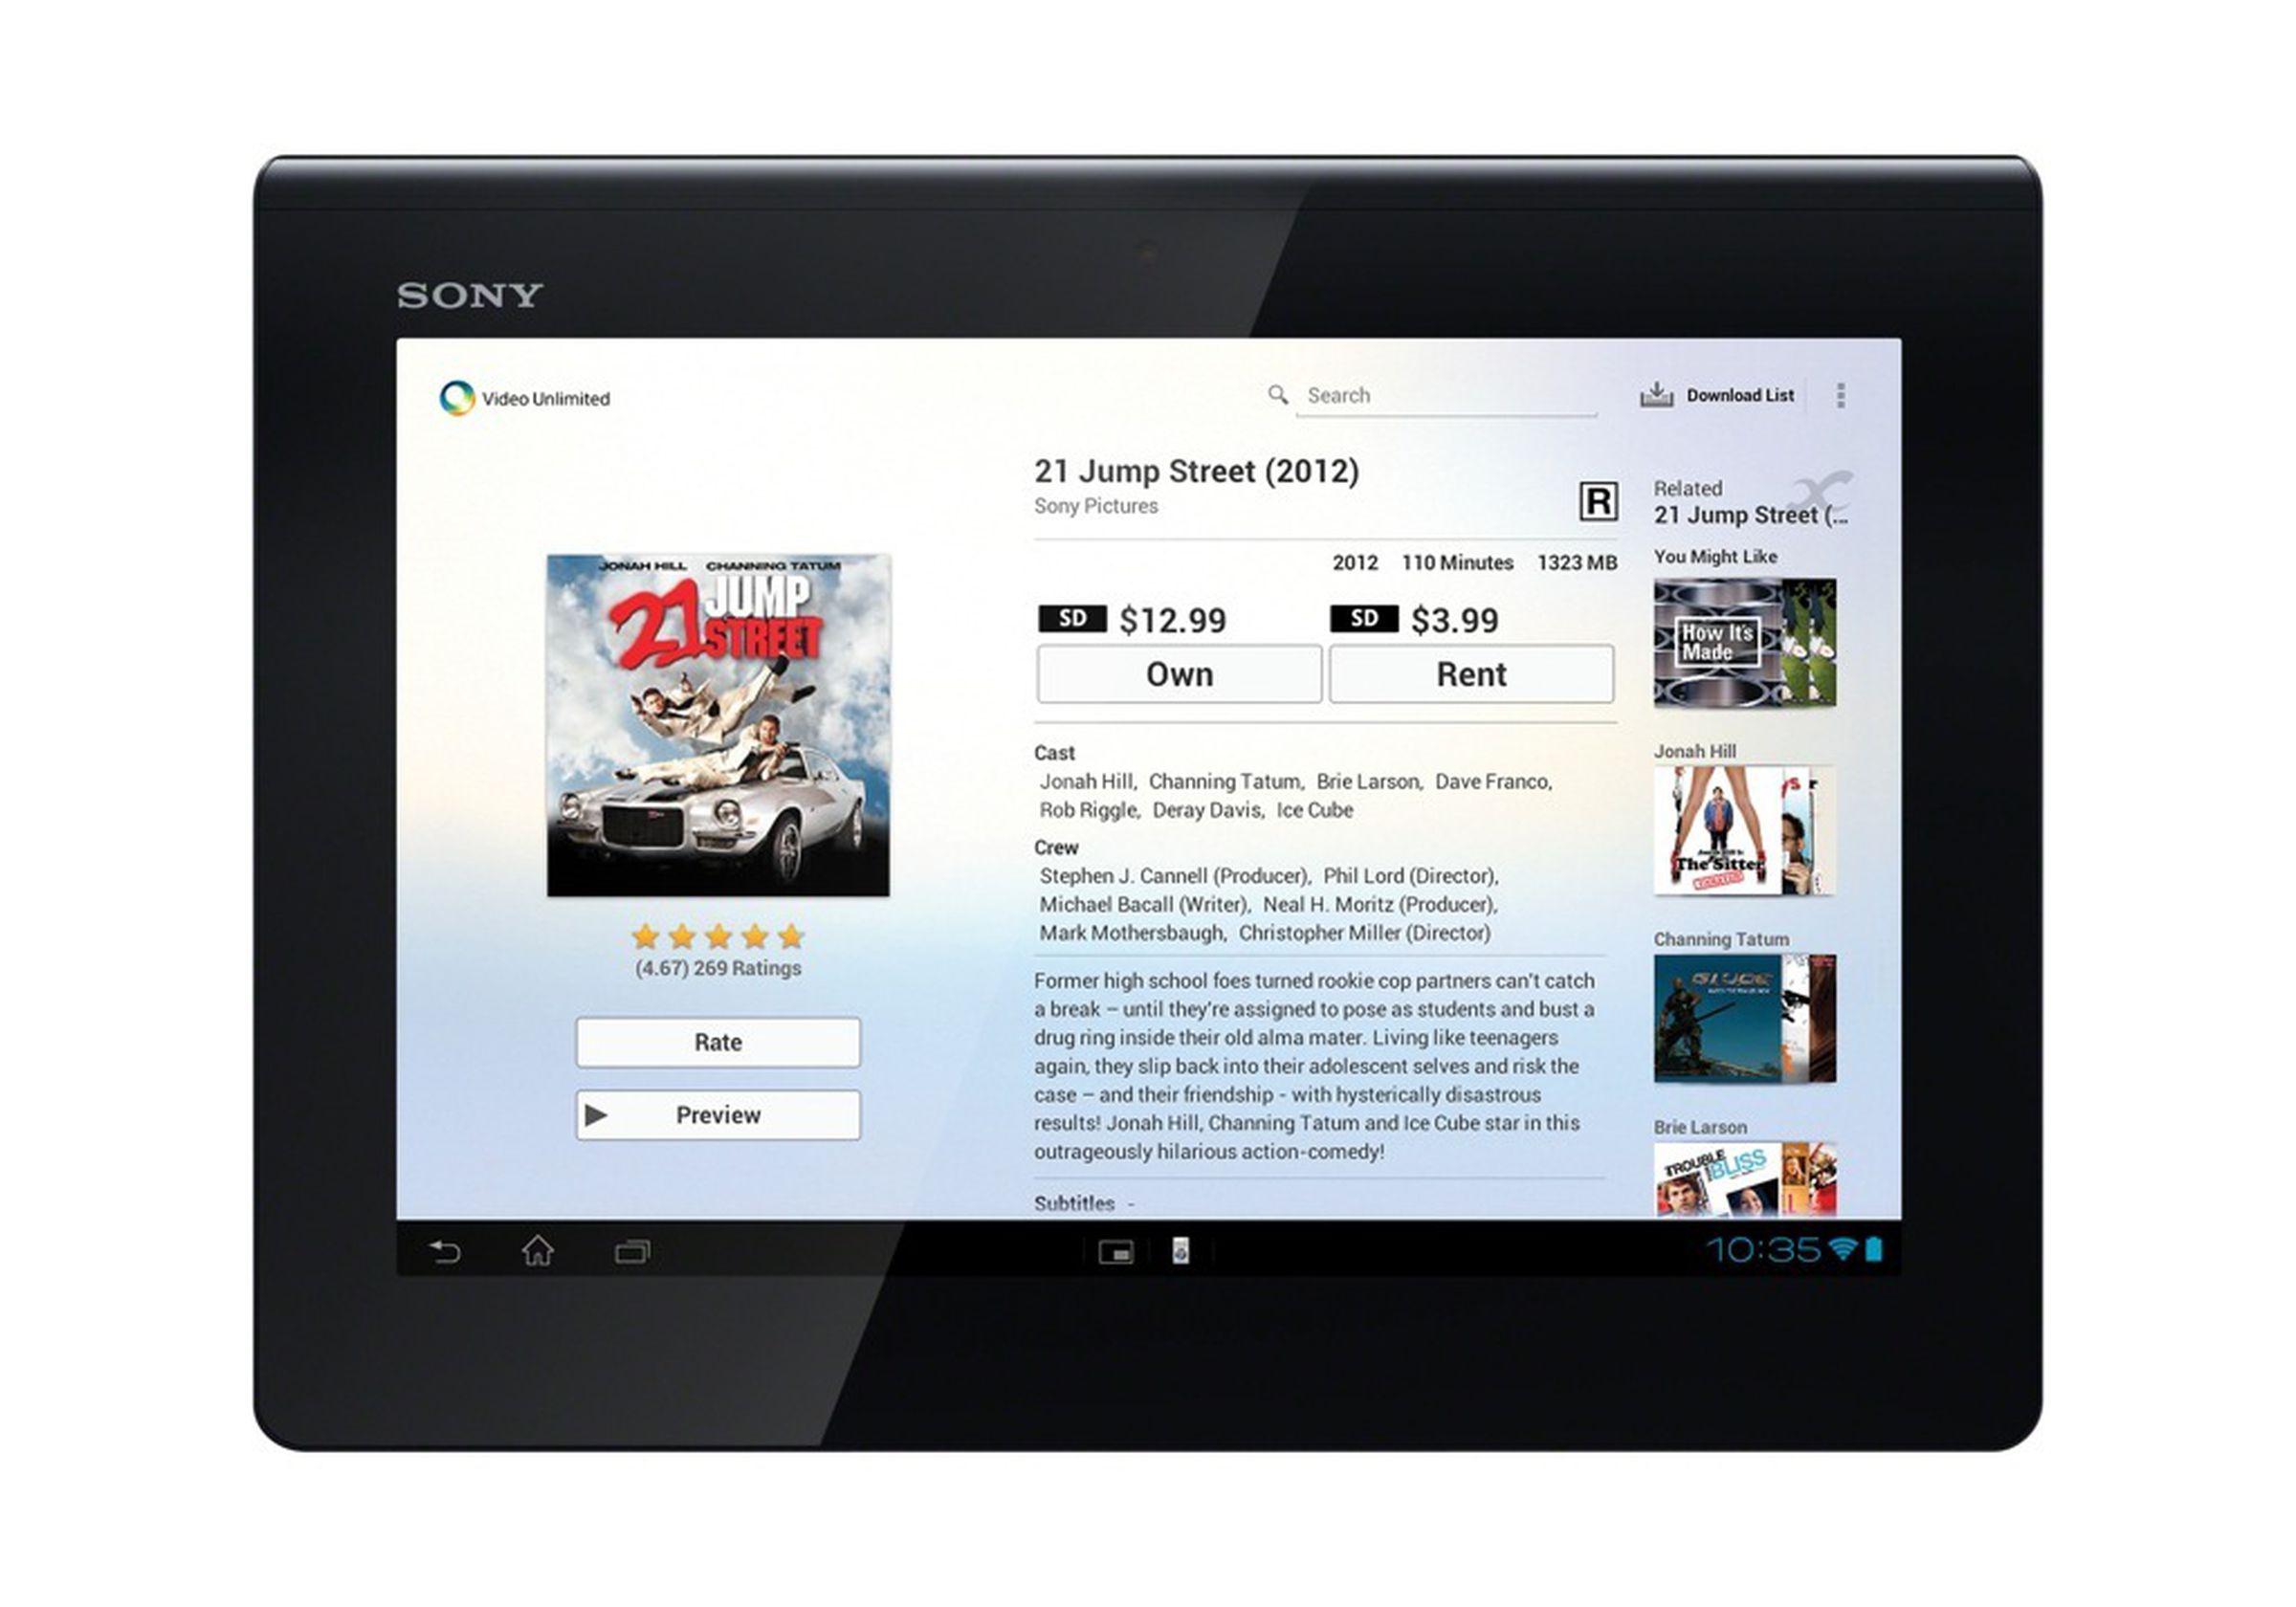 Sony Xperia Tablet S pictures